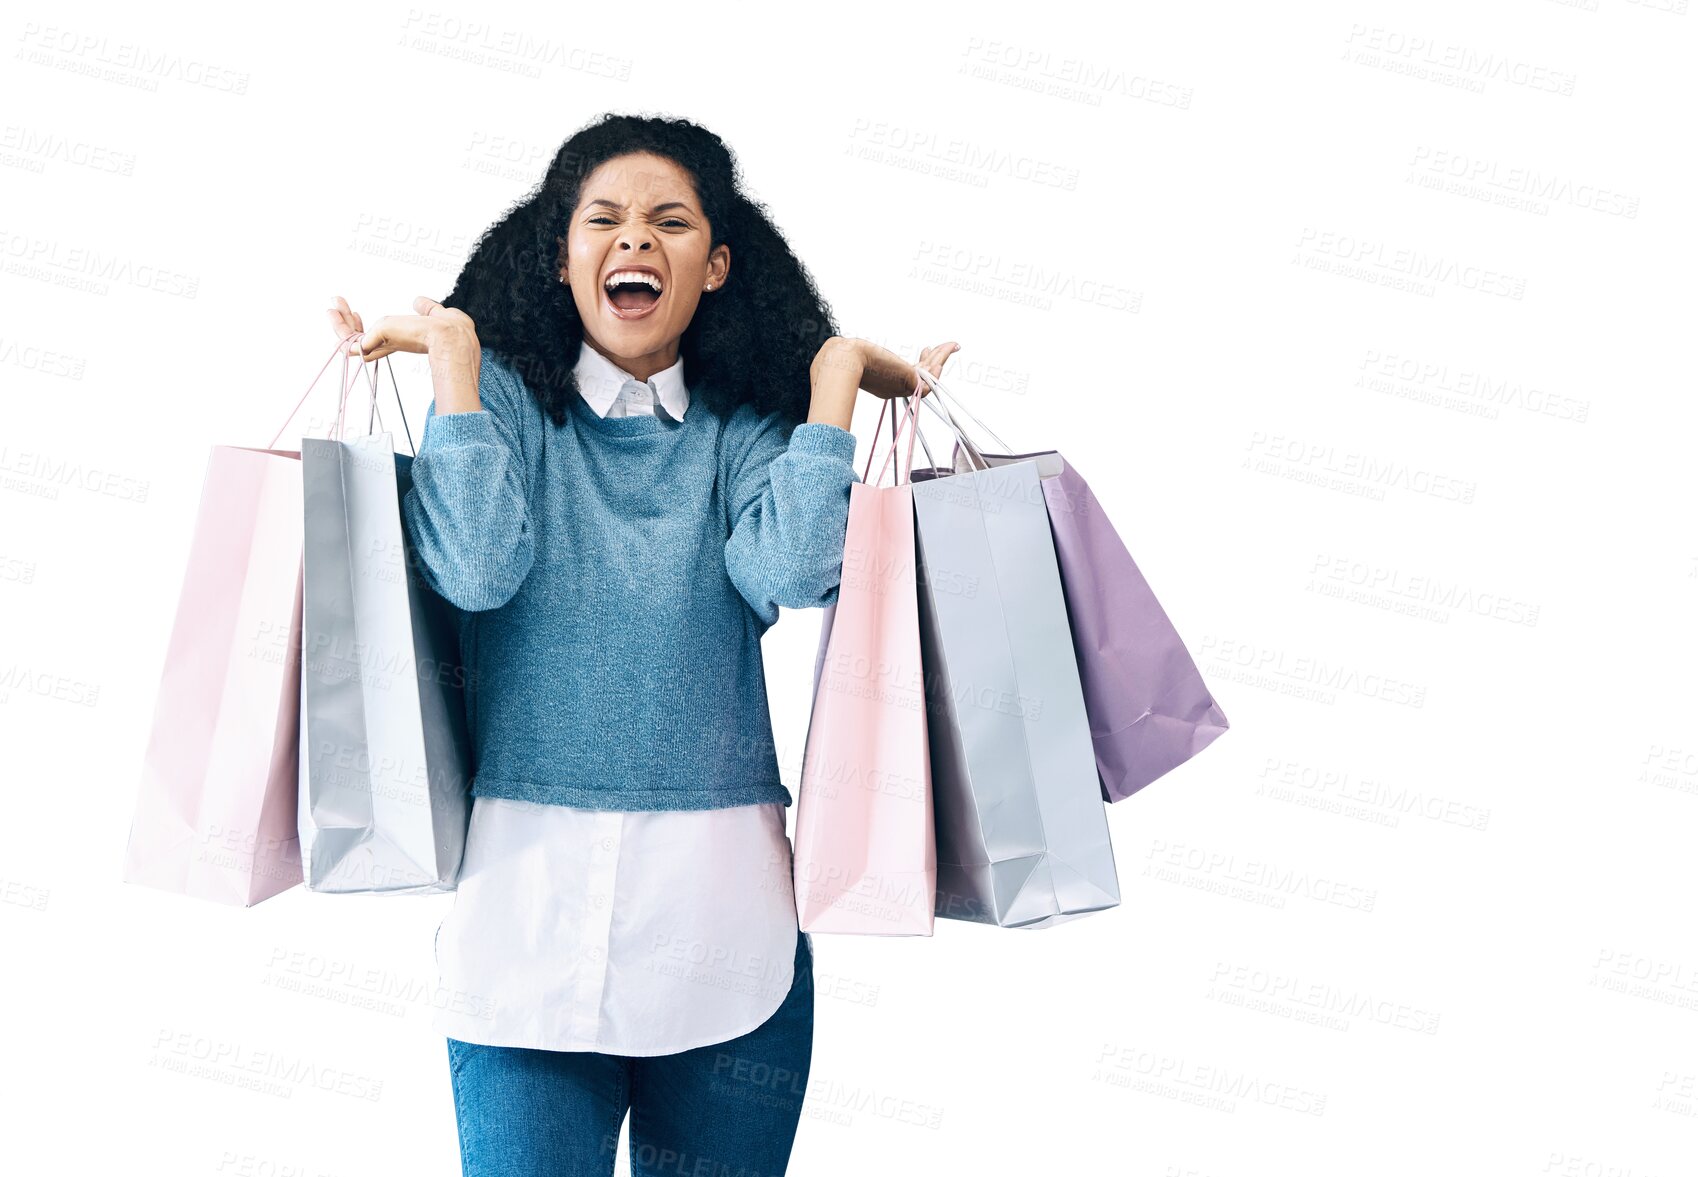 Buy stock photo Excited woman, portrait and shopping bag for discount, sale or promo isolated on a transparent PNG background. Happy female person or shopper with gift bags screaming for purchase, deal or promotion